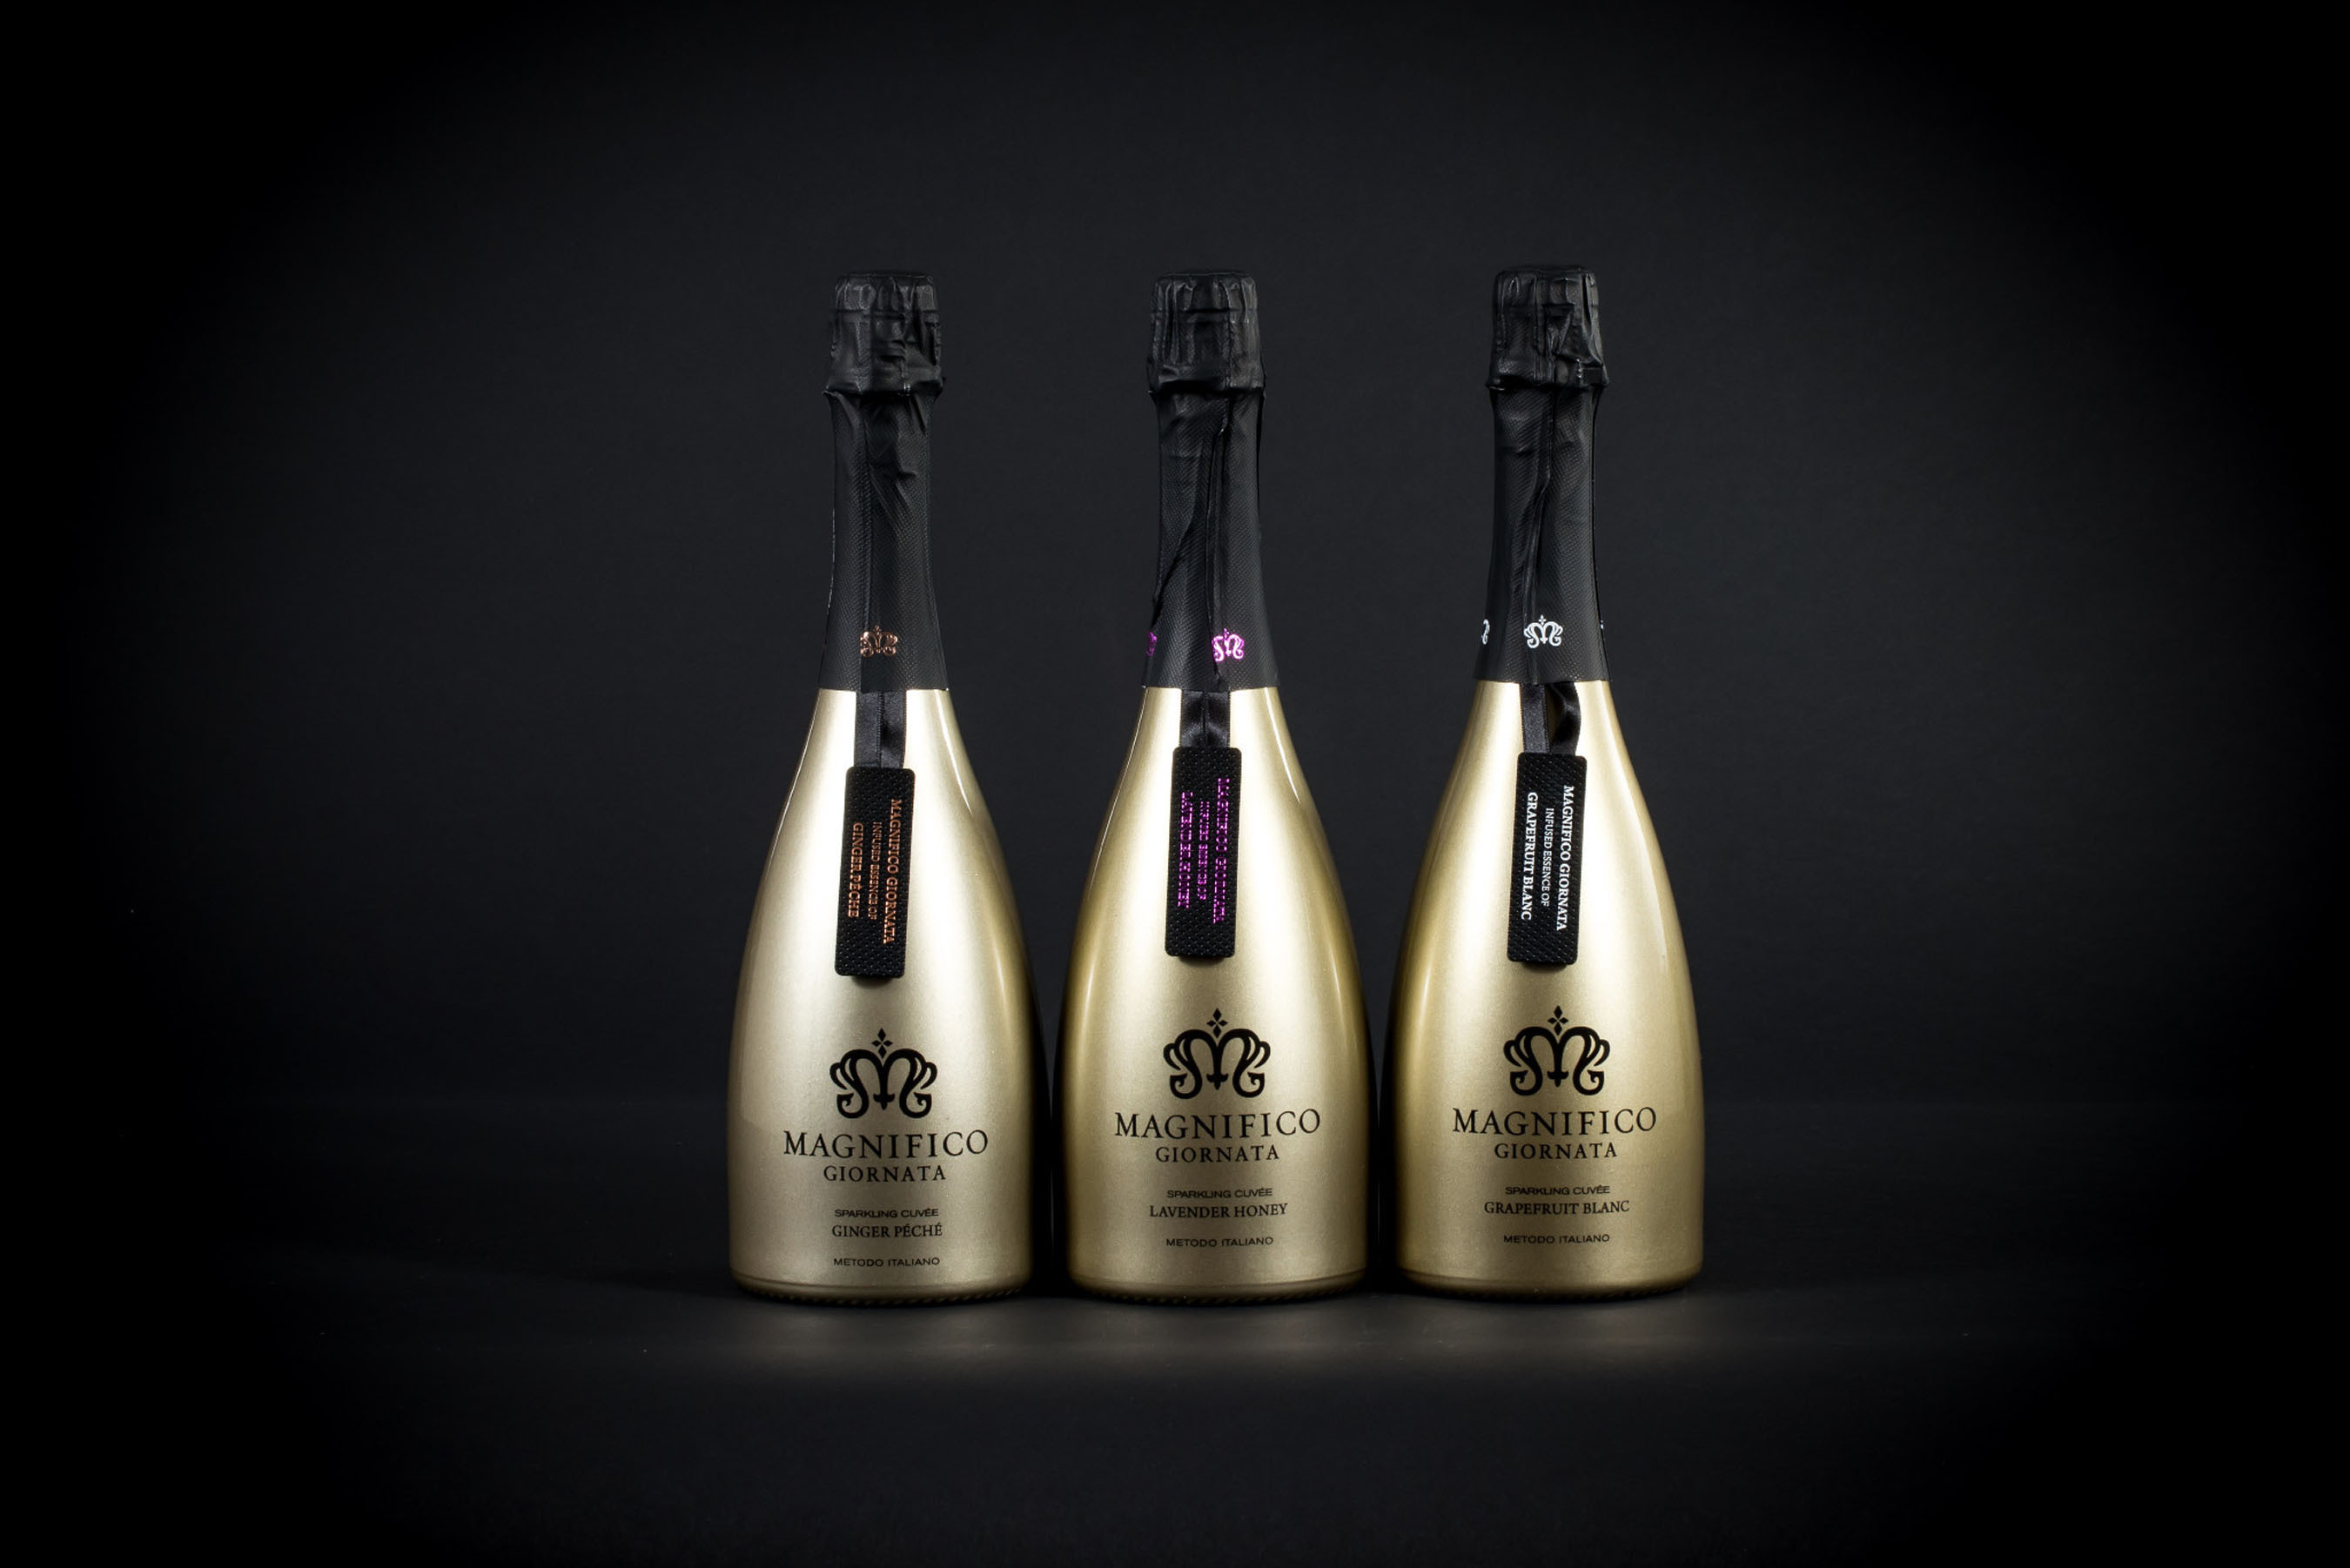 Magnifico's Infused Essence Collection features all-natural essences sourced exclusively from France to create three distinct profiles: Ginger Peche, Grapefruit Blanc and Lavender Honey. (PRNewsFoto/Diamond Brands Inc.) (PRNewsFoto/DIAMOND BRANDS INC.)